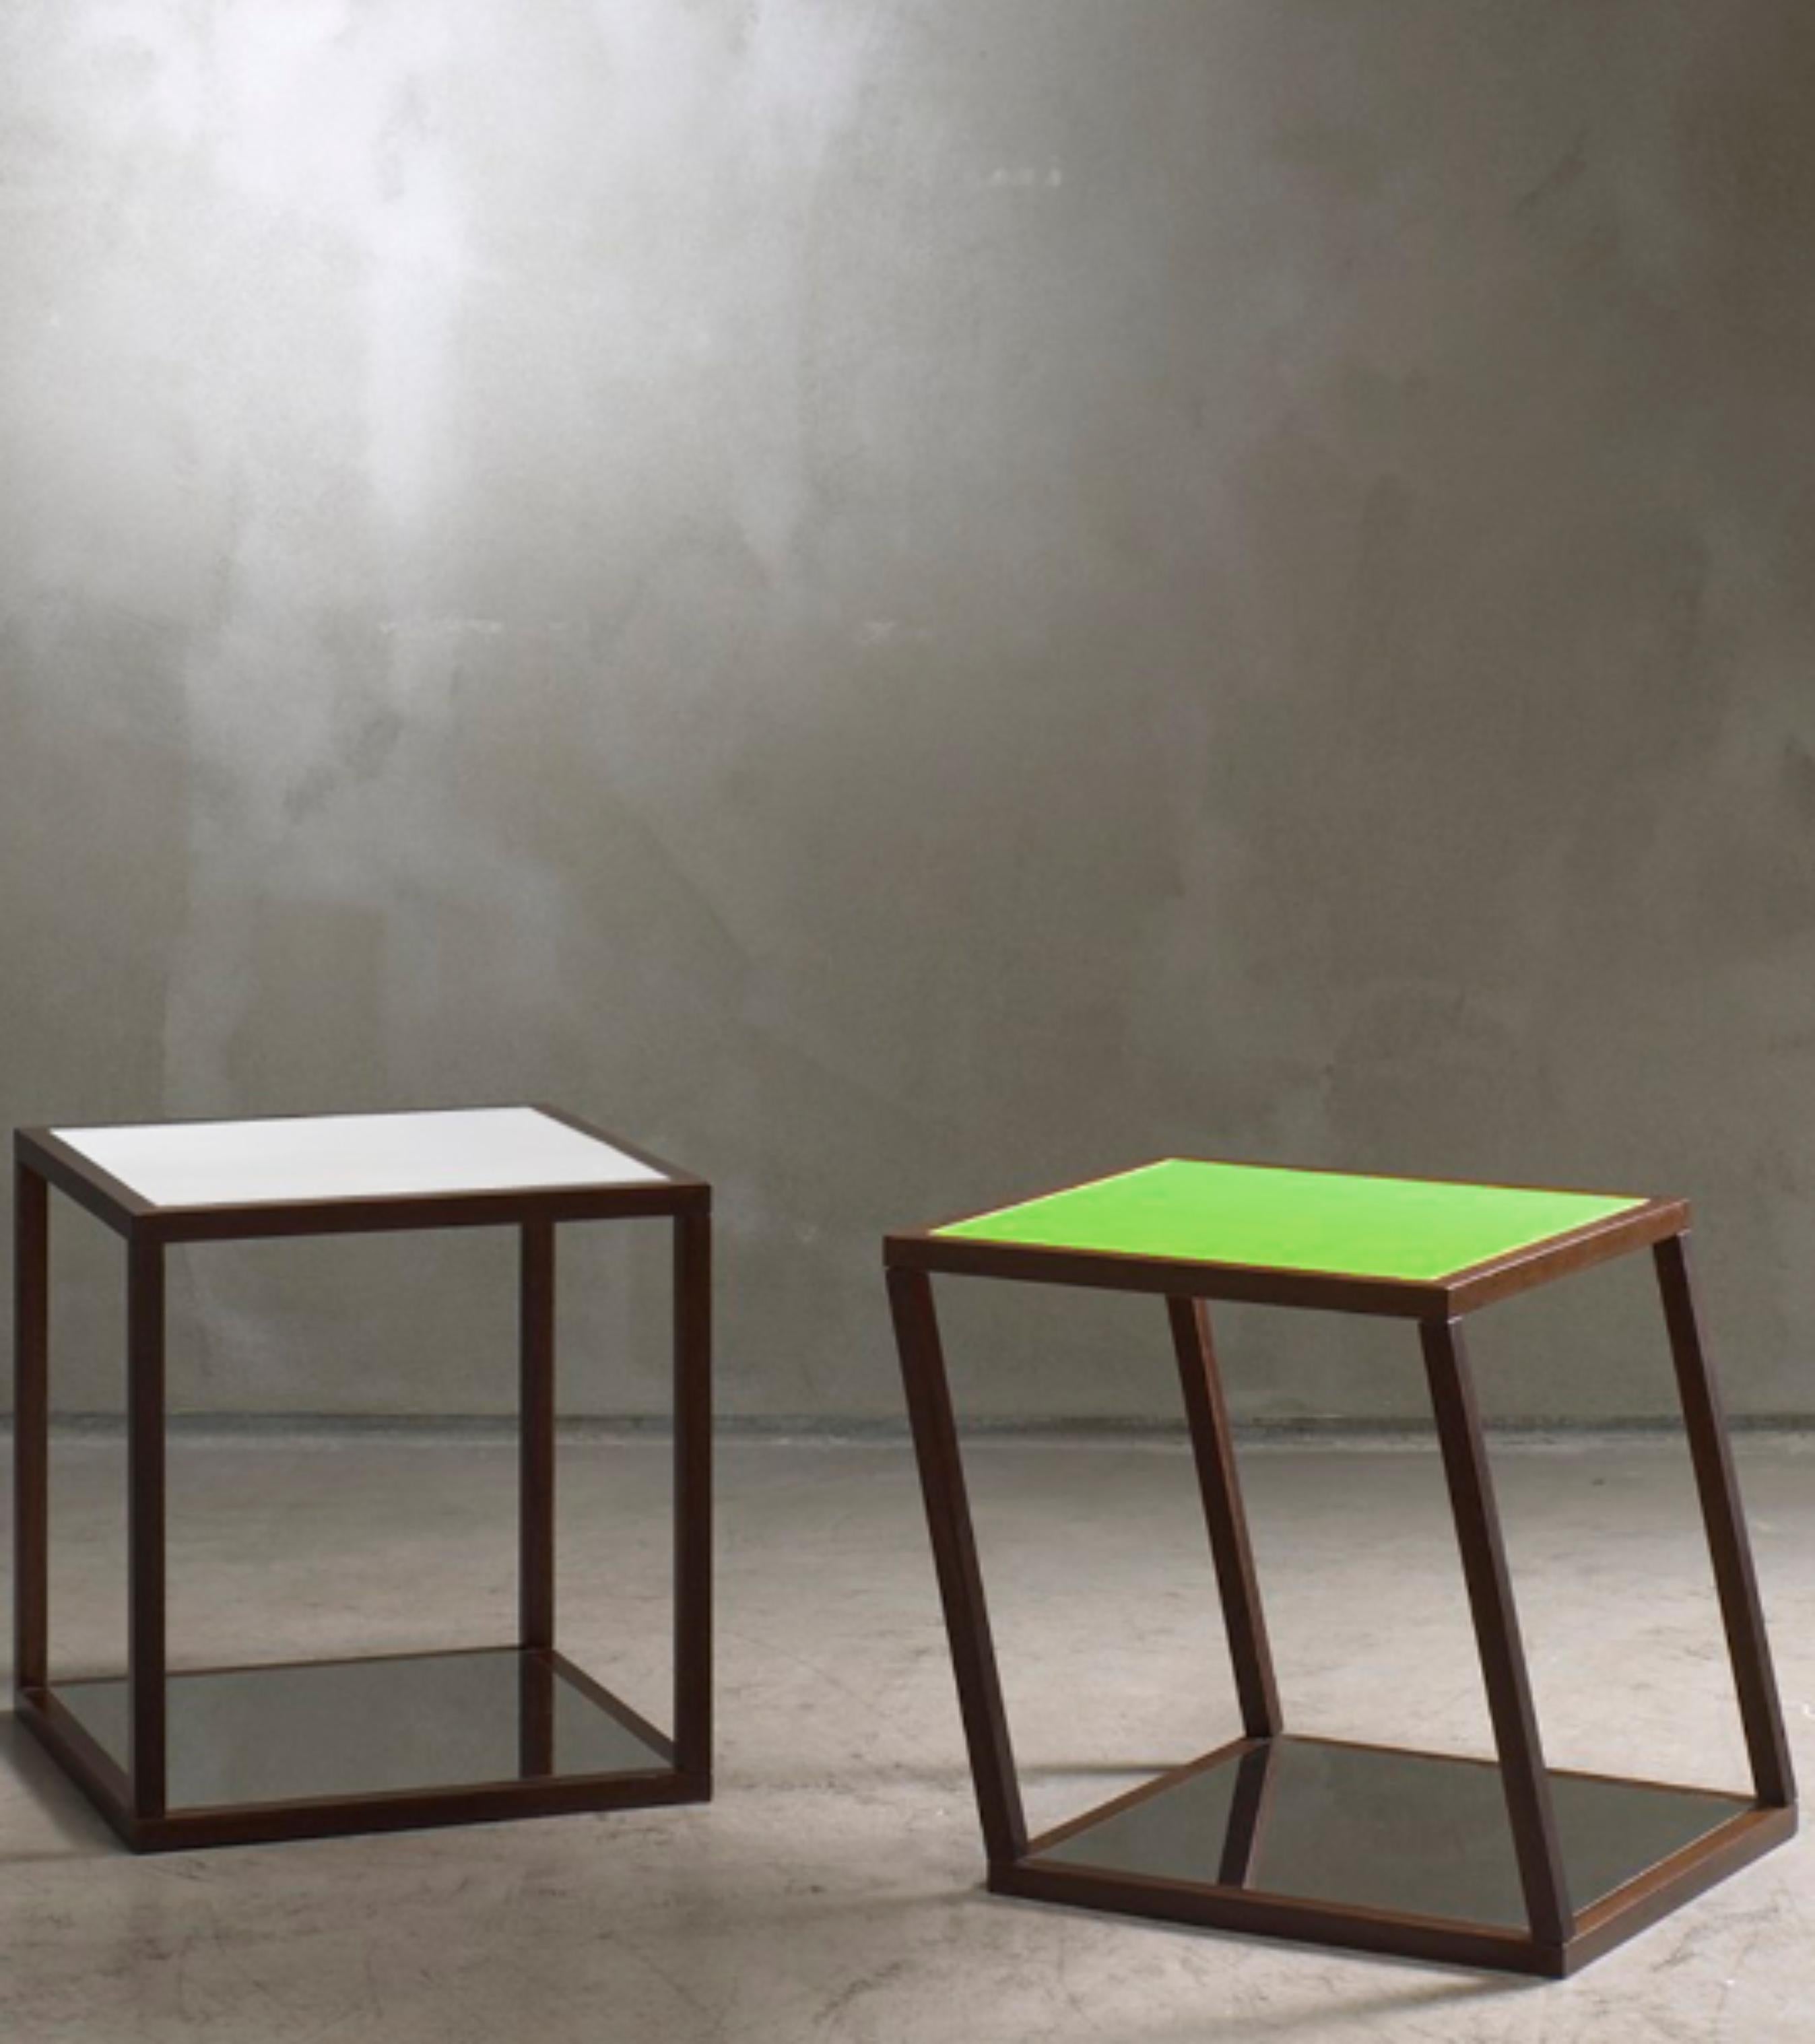 CF LT07.5 Low Table by Caturegli Formica.
Dimensions: W 38 x D 38 H 40 cm.
Materials: Wood, Plastic.

The top of low tables changes its colour according to the point of view.
S-Steel structure available

Biographical notes

Beppe Caturegli